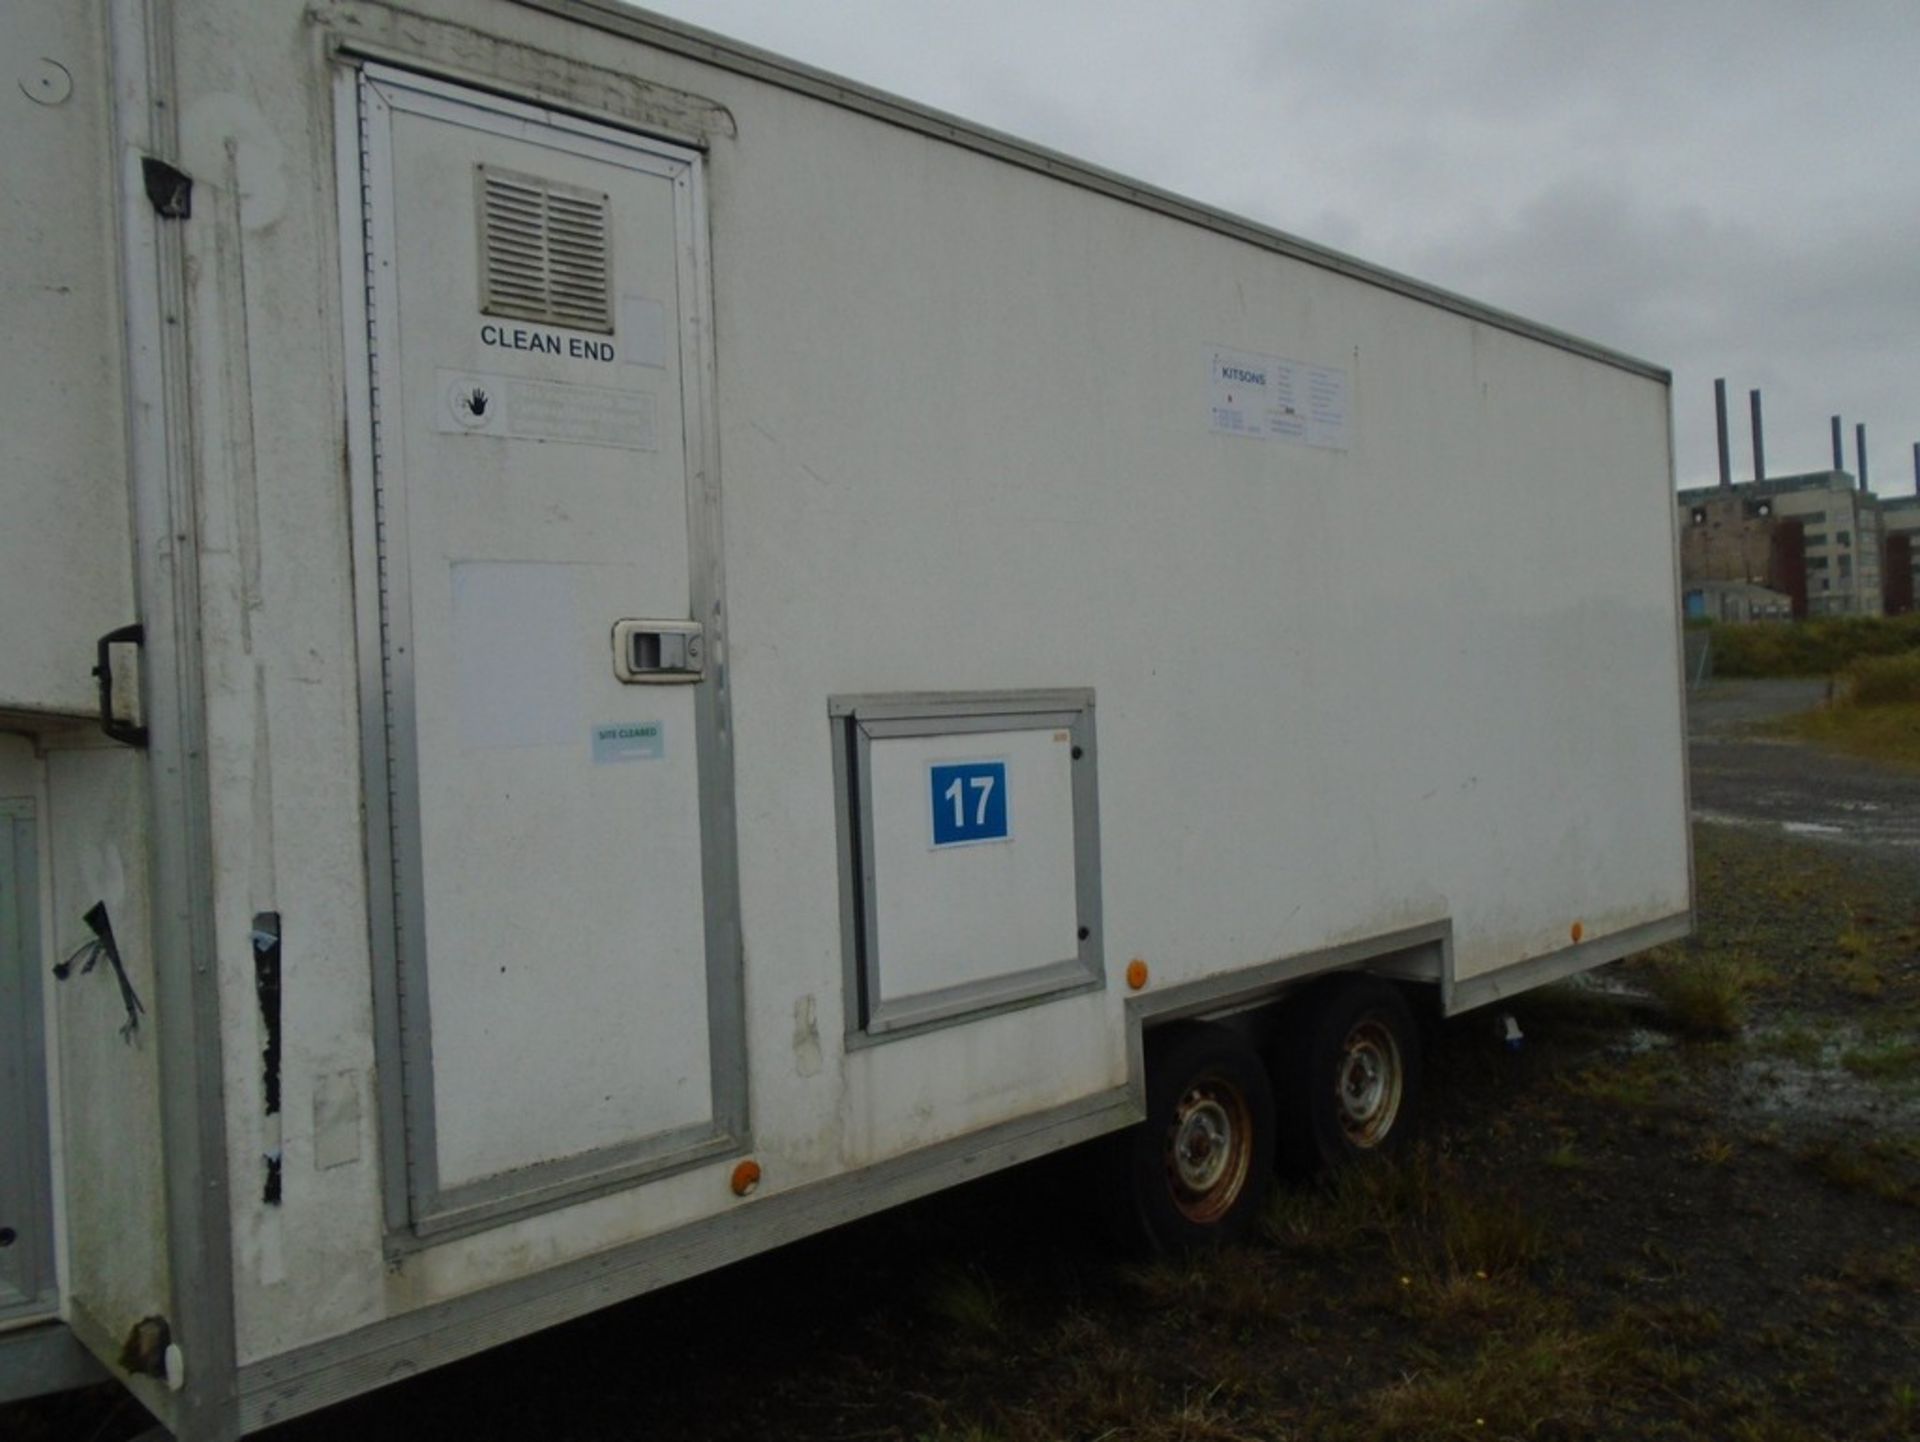 2 X TWIN AXLE FIBREGLAS BODY SHOWER/WELLFARE UNIT TRAILERS (USED FOR ASBESTOS CLEAN UP)